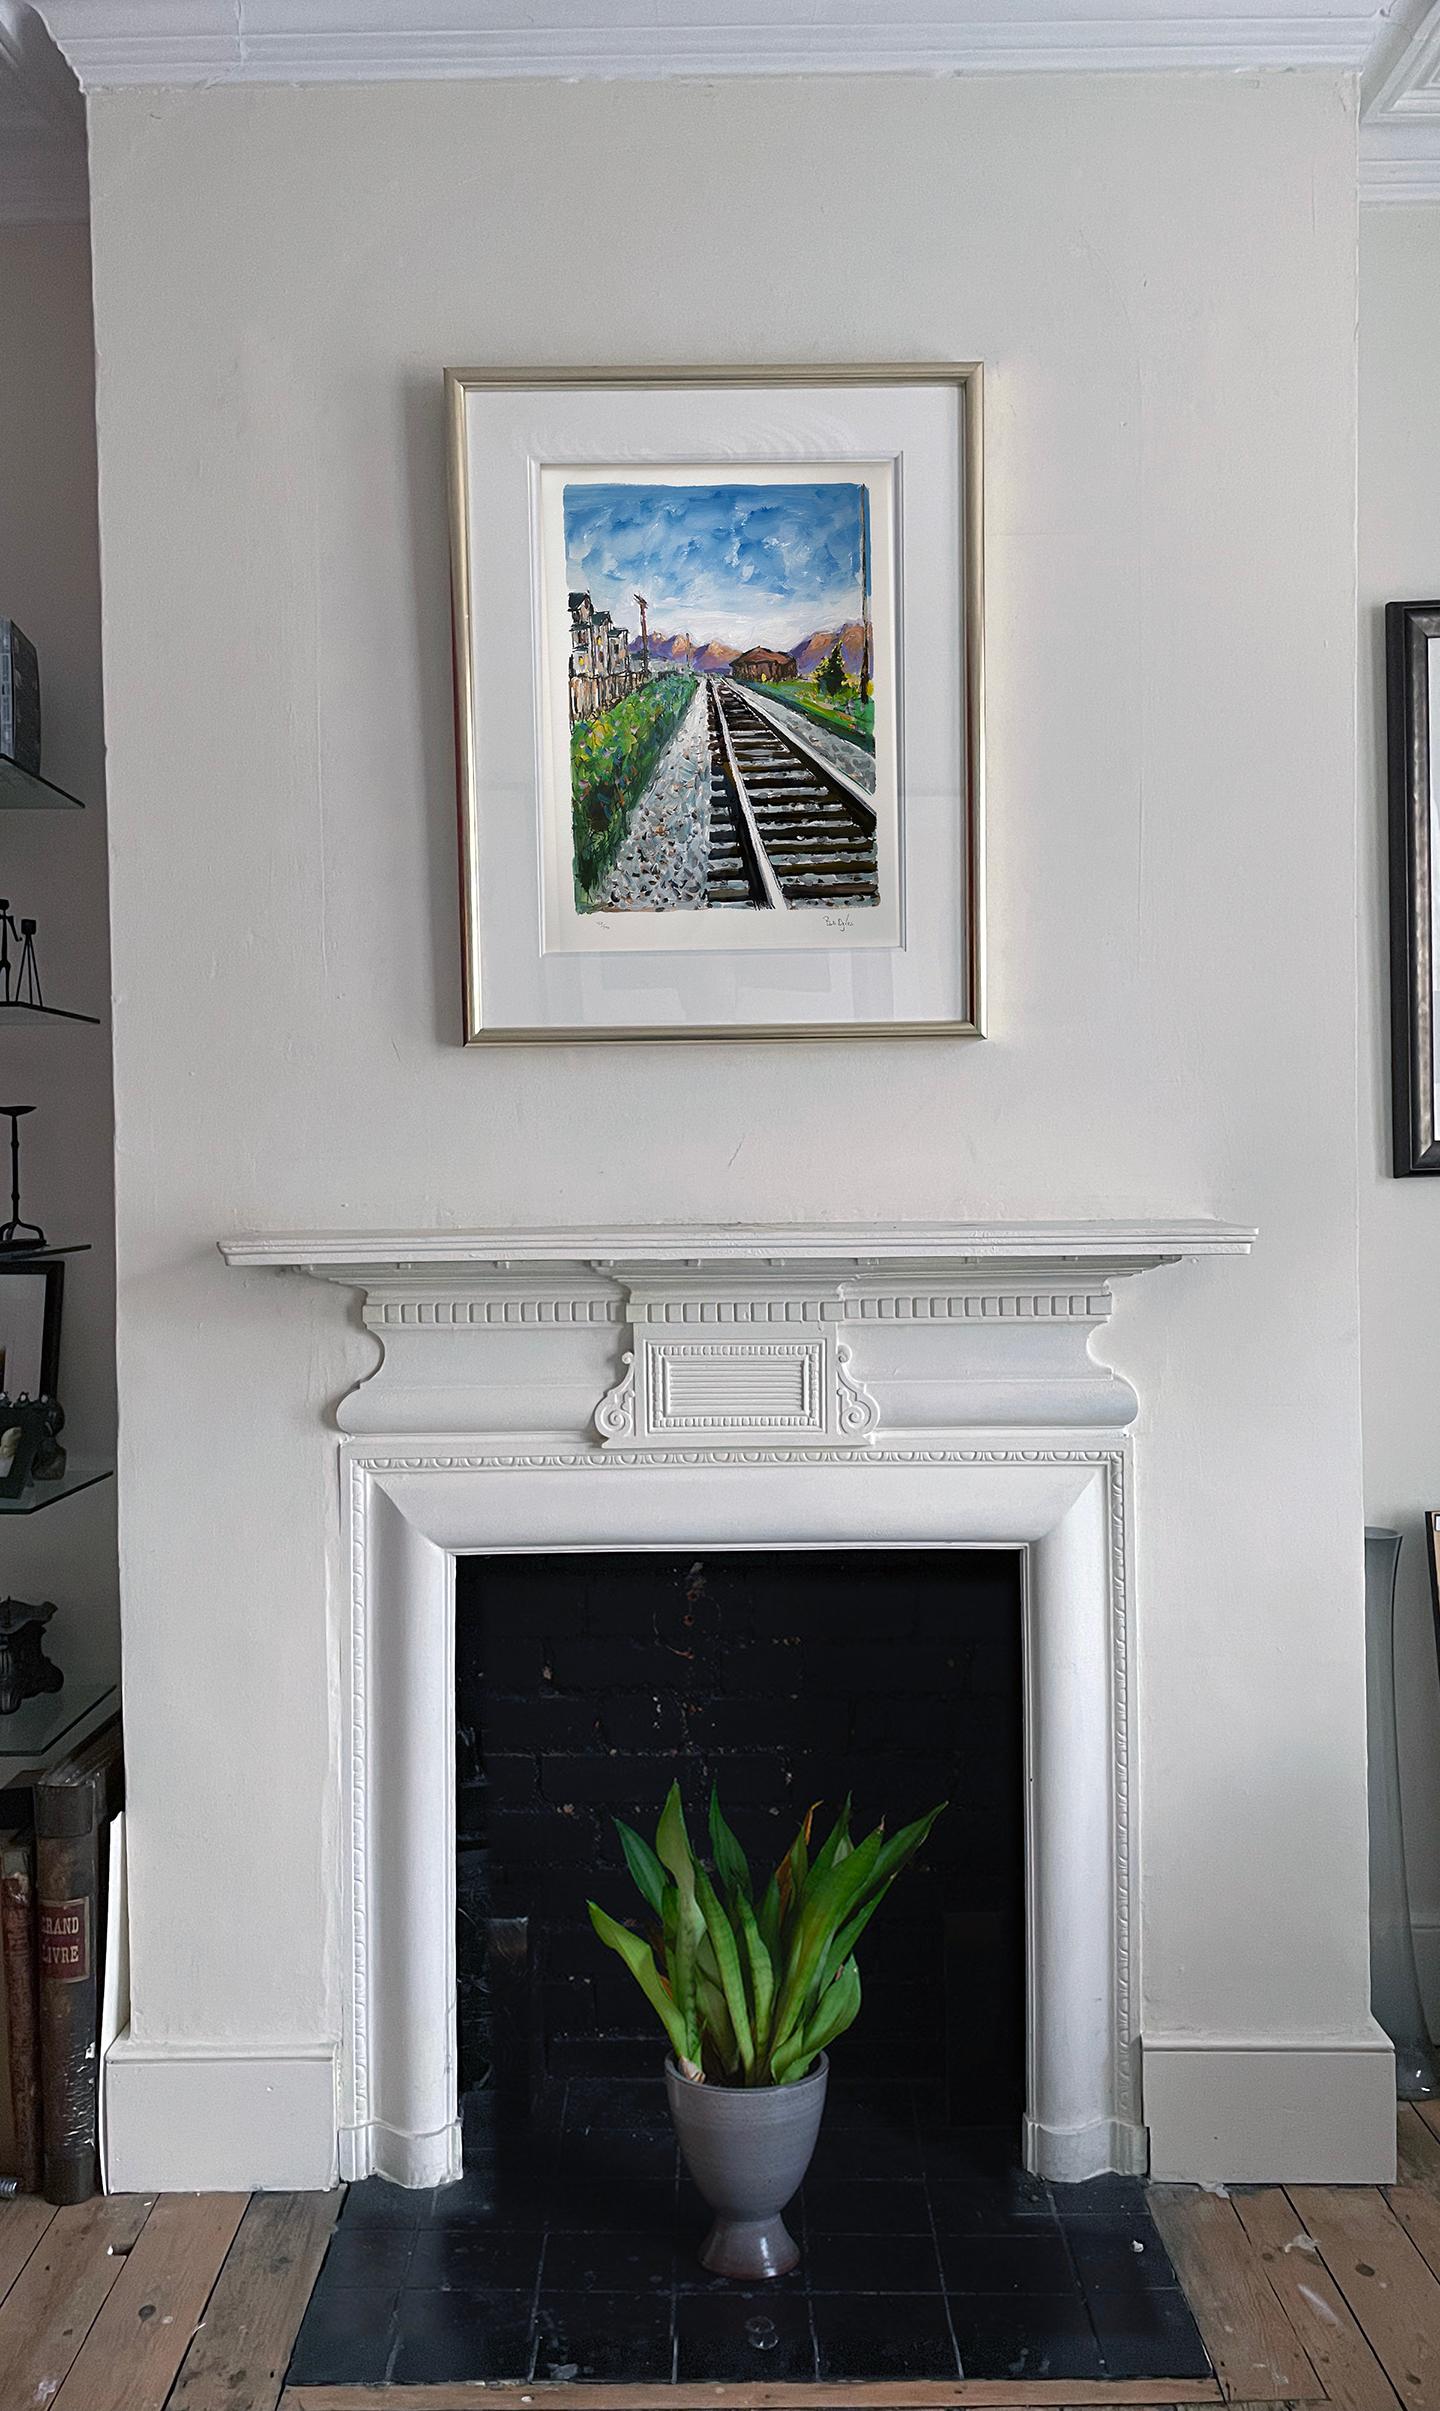 magritte train coming out of fireplace